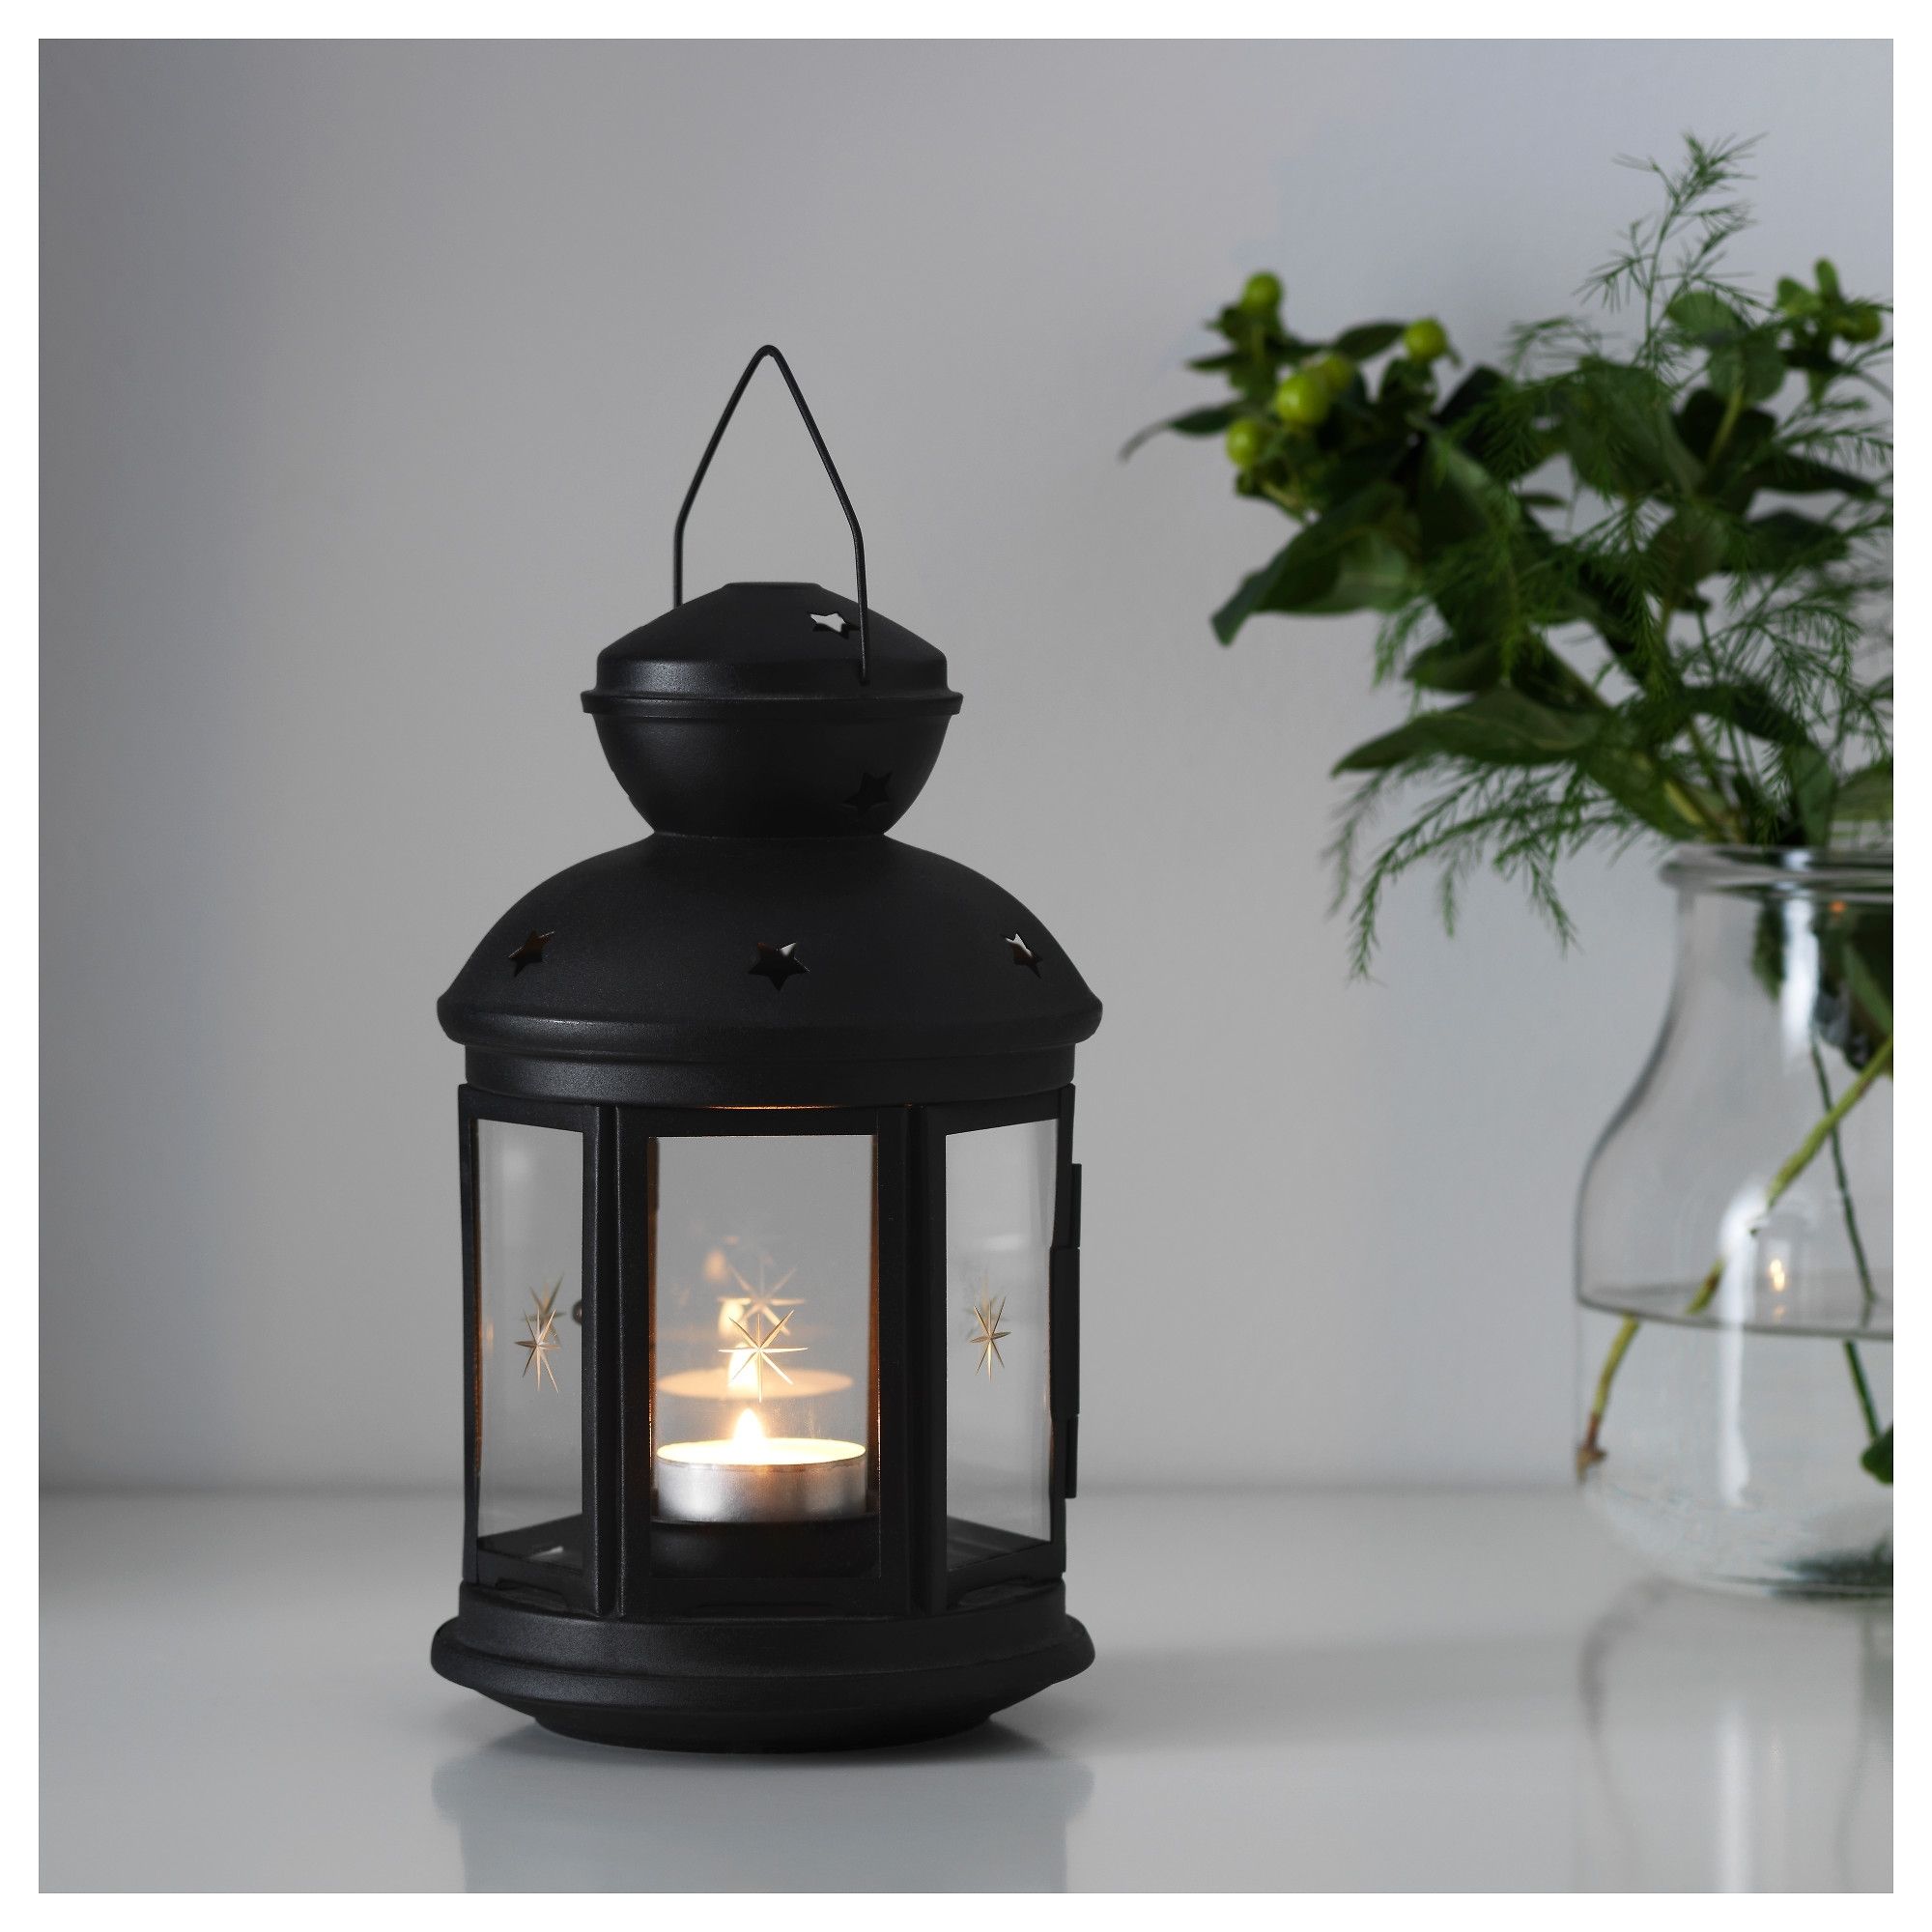 Rotera Lantern For Tealight – Ikea Intended For Hanging Outdoor Tea Light Lanterns (View 4 of 15)